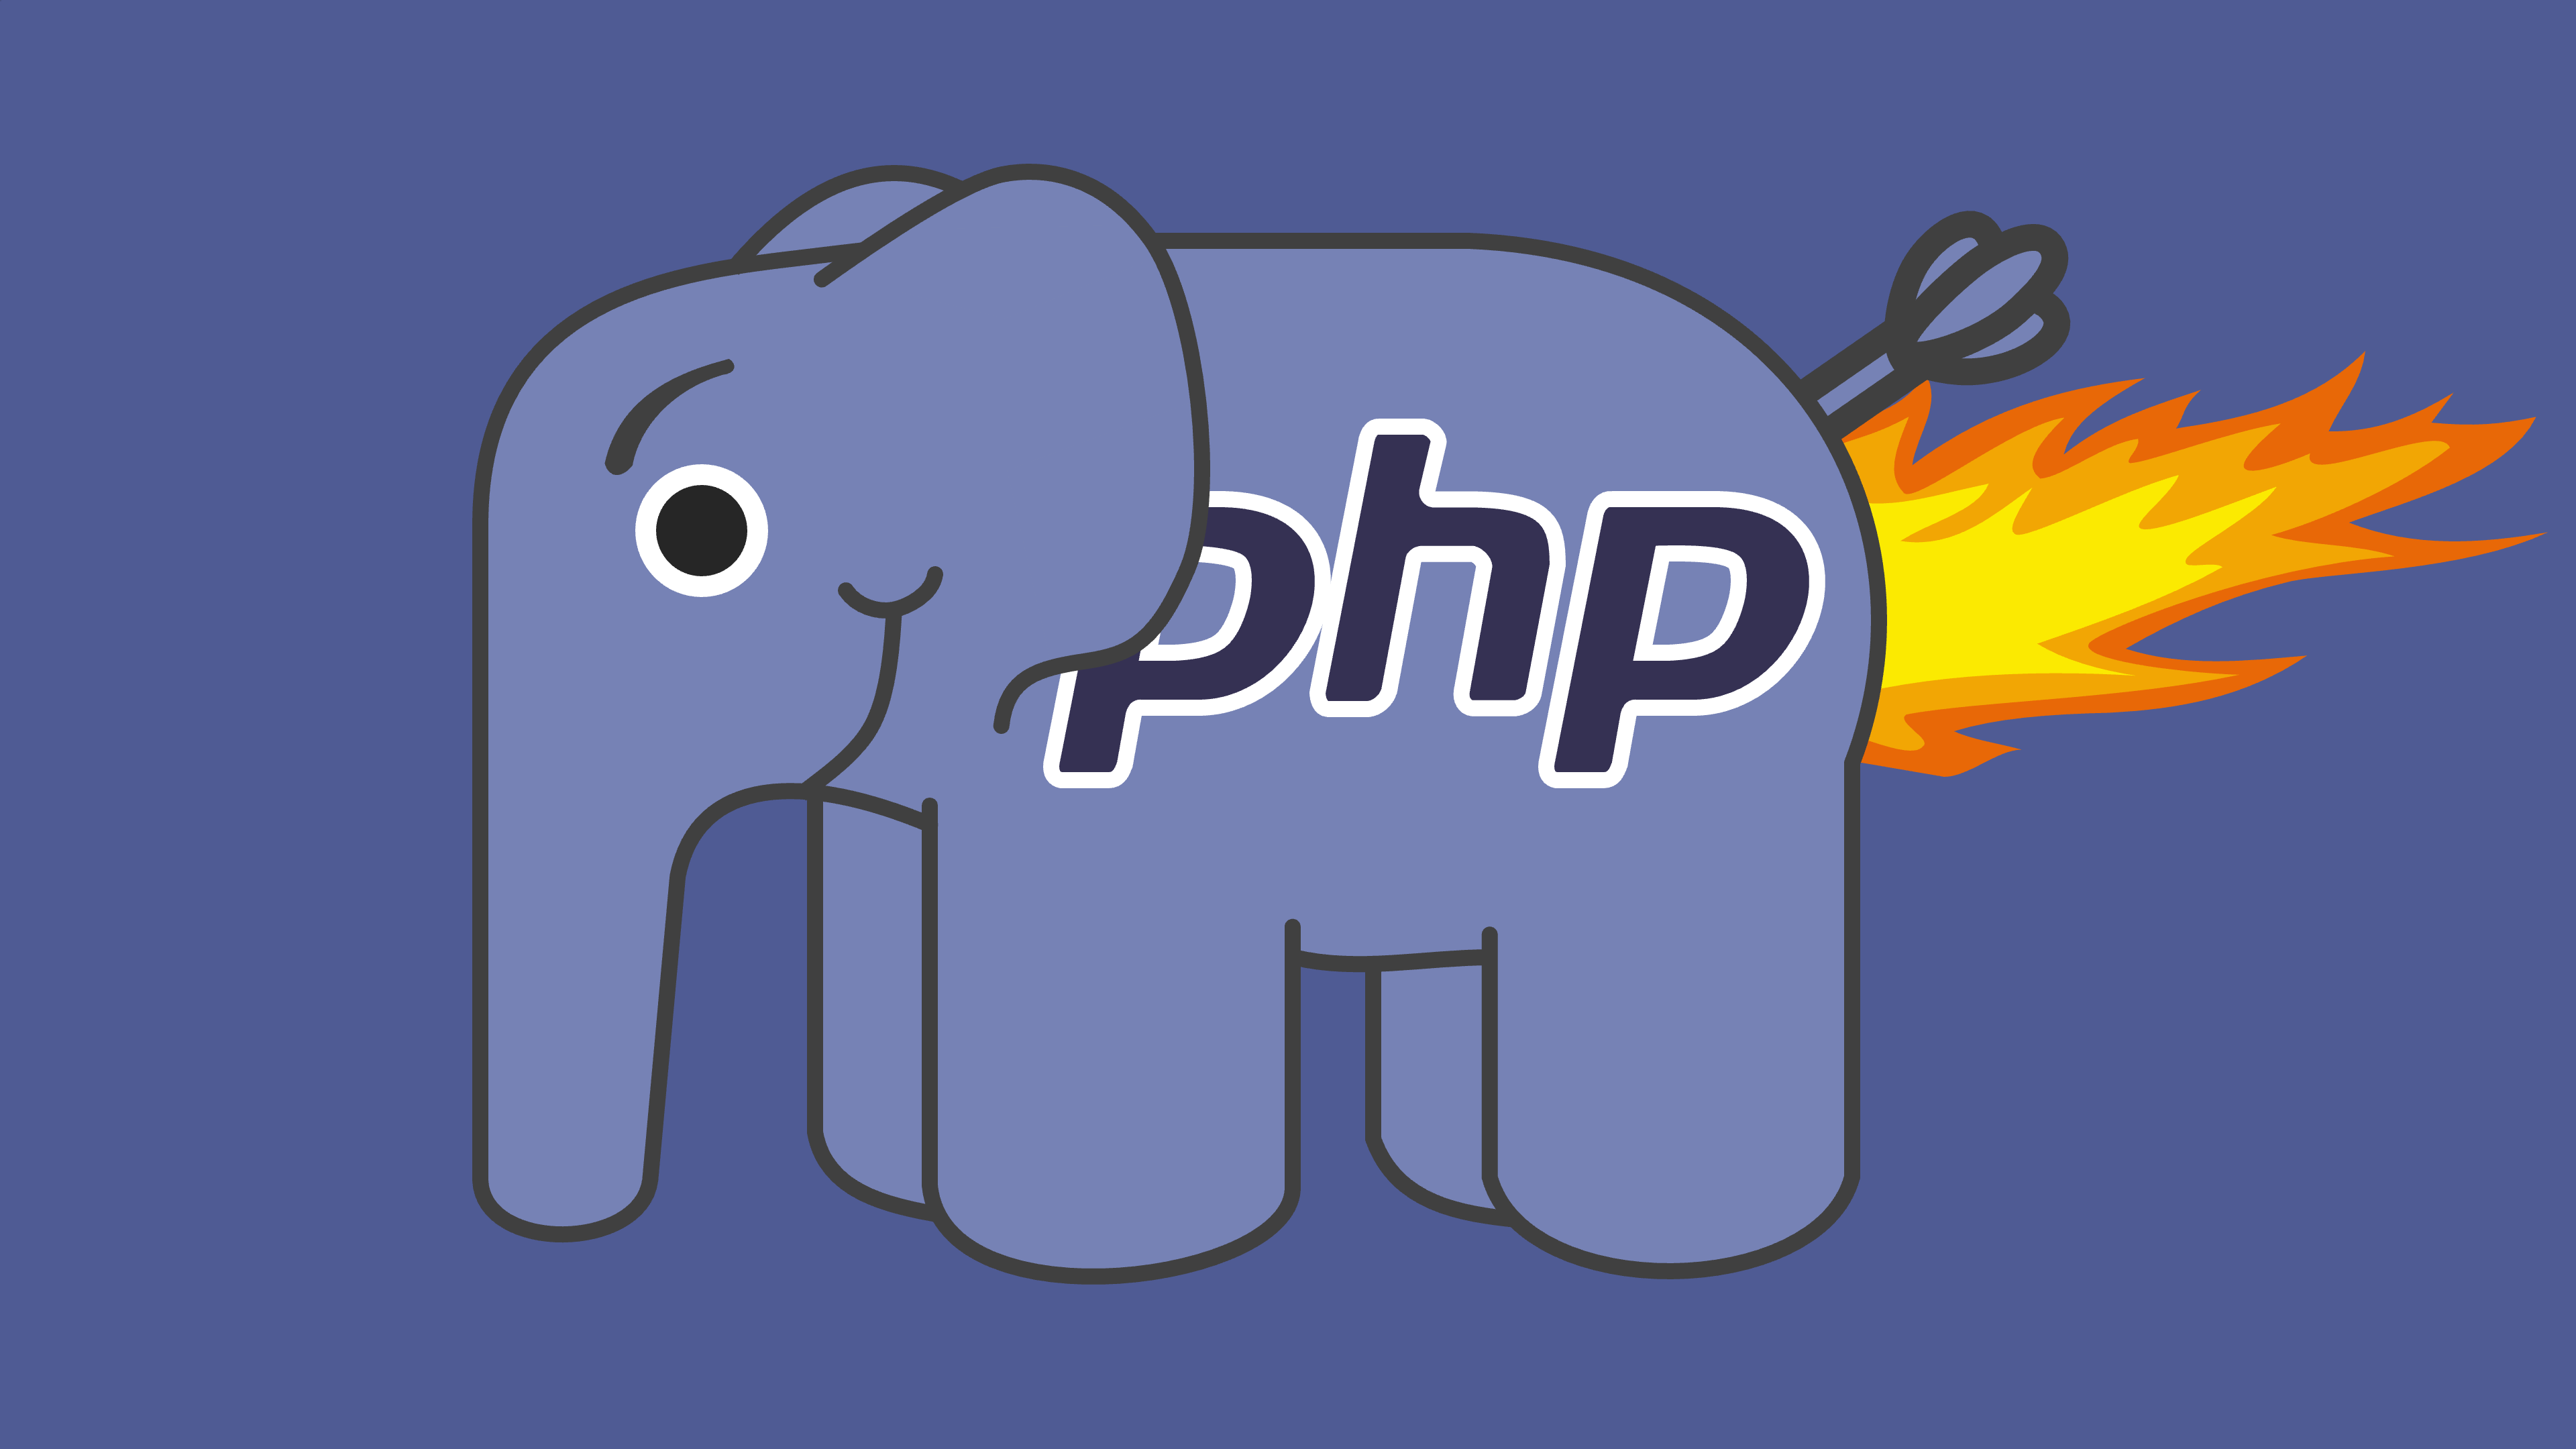 An elephant (PHP’s mascot) farts fire